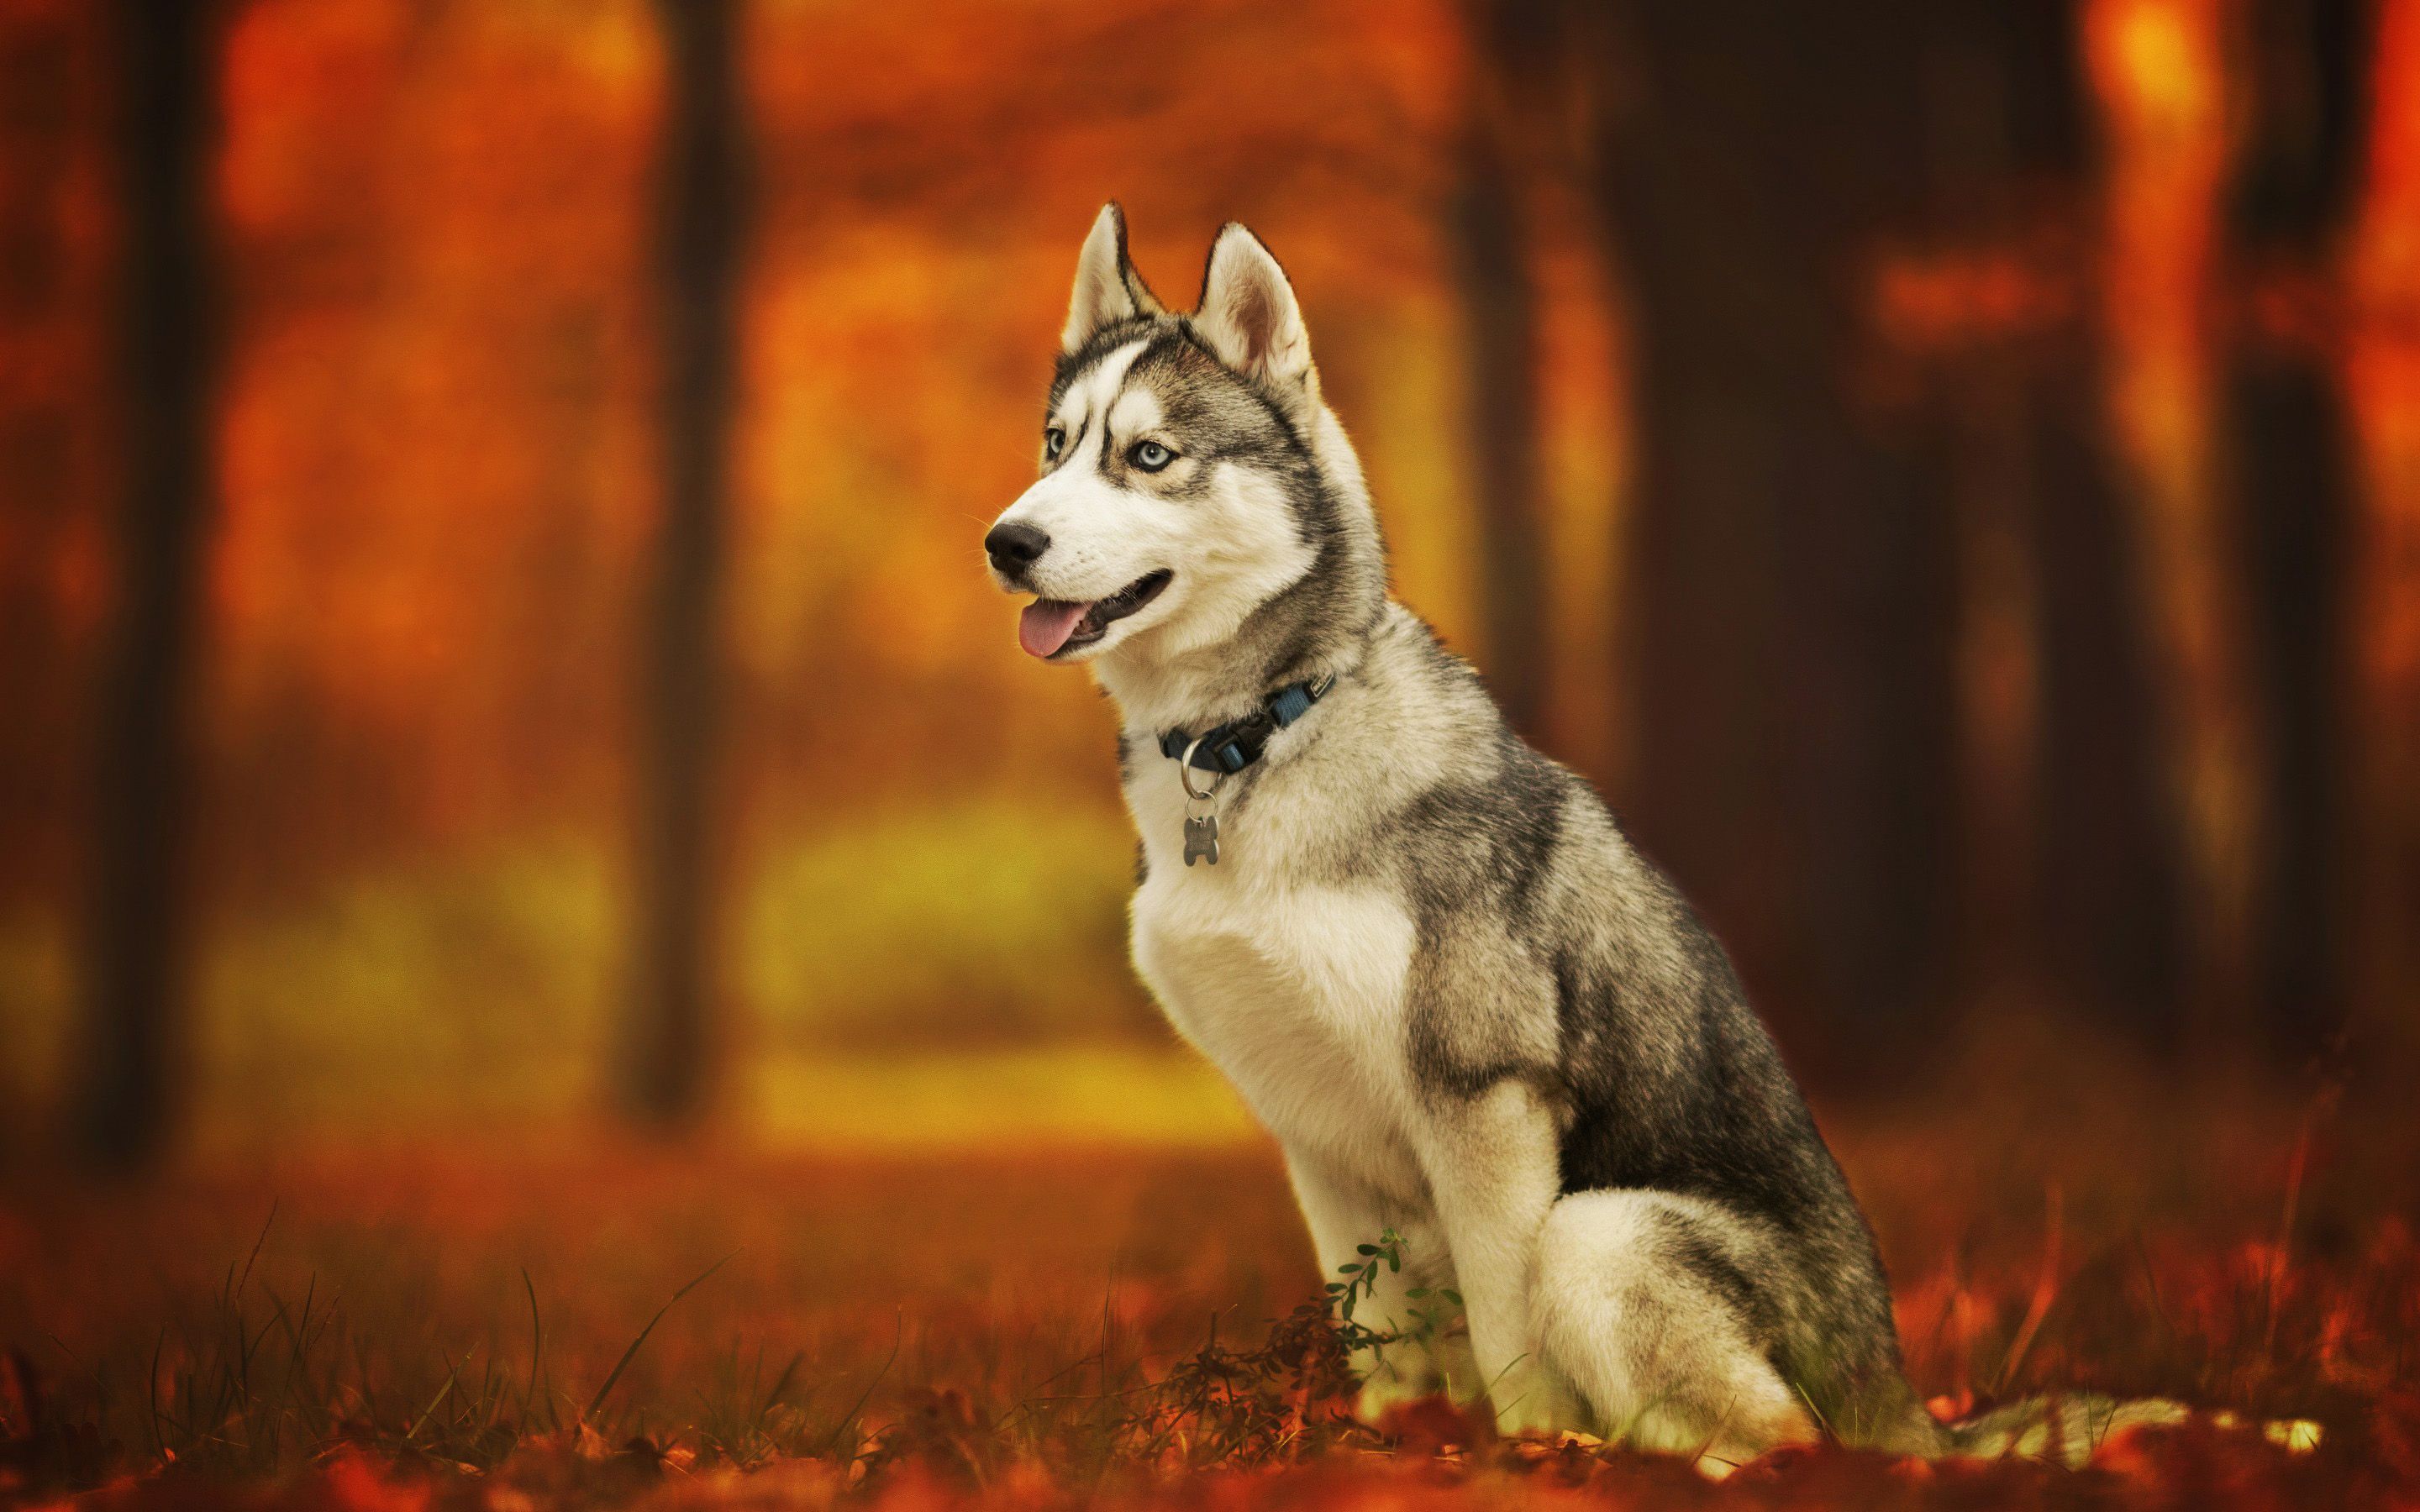 Download wallpaper Siberian Husky, autumn, pets, cute animals, bokeh, forest, Husky, cute dog, dogs, Siberian Husky Dog for desktop with resolution 2880x1800. High Quality HD picture wallpaper